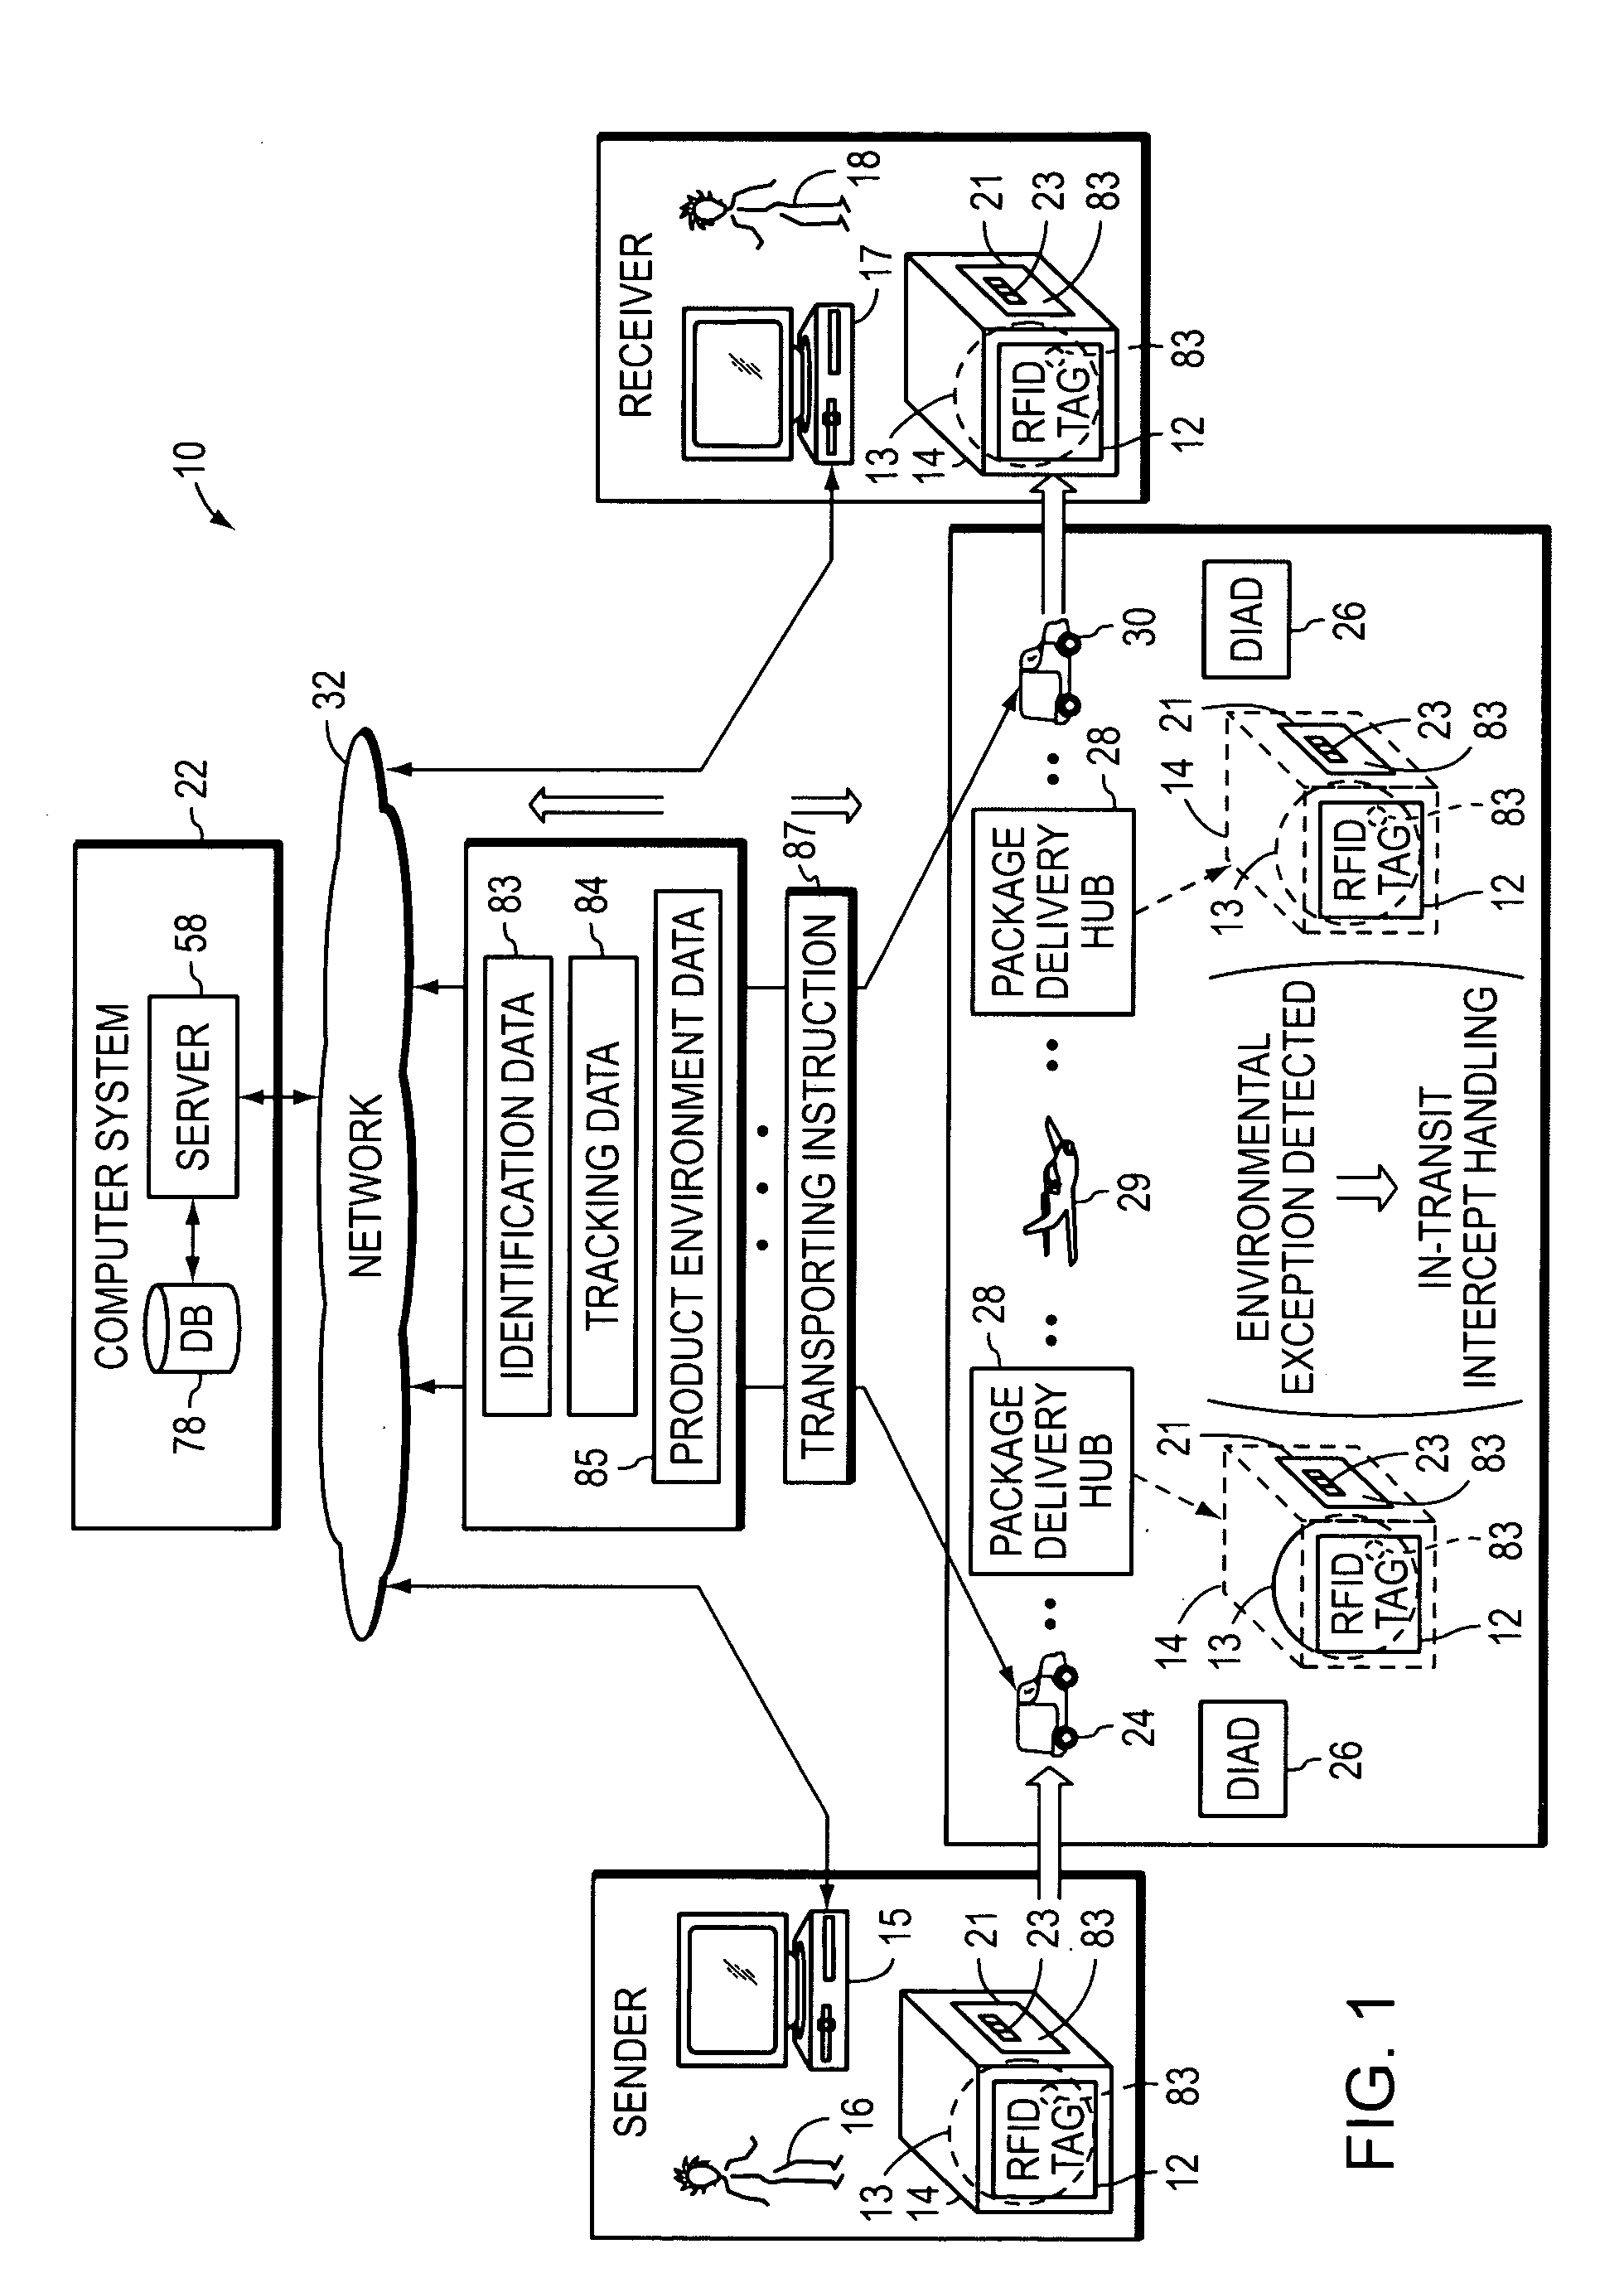 Systems and methods for transporting a product using an environmental sensor